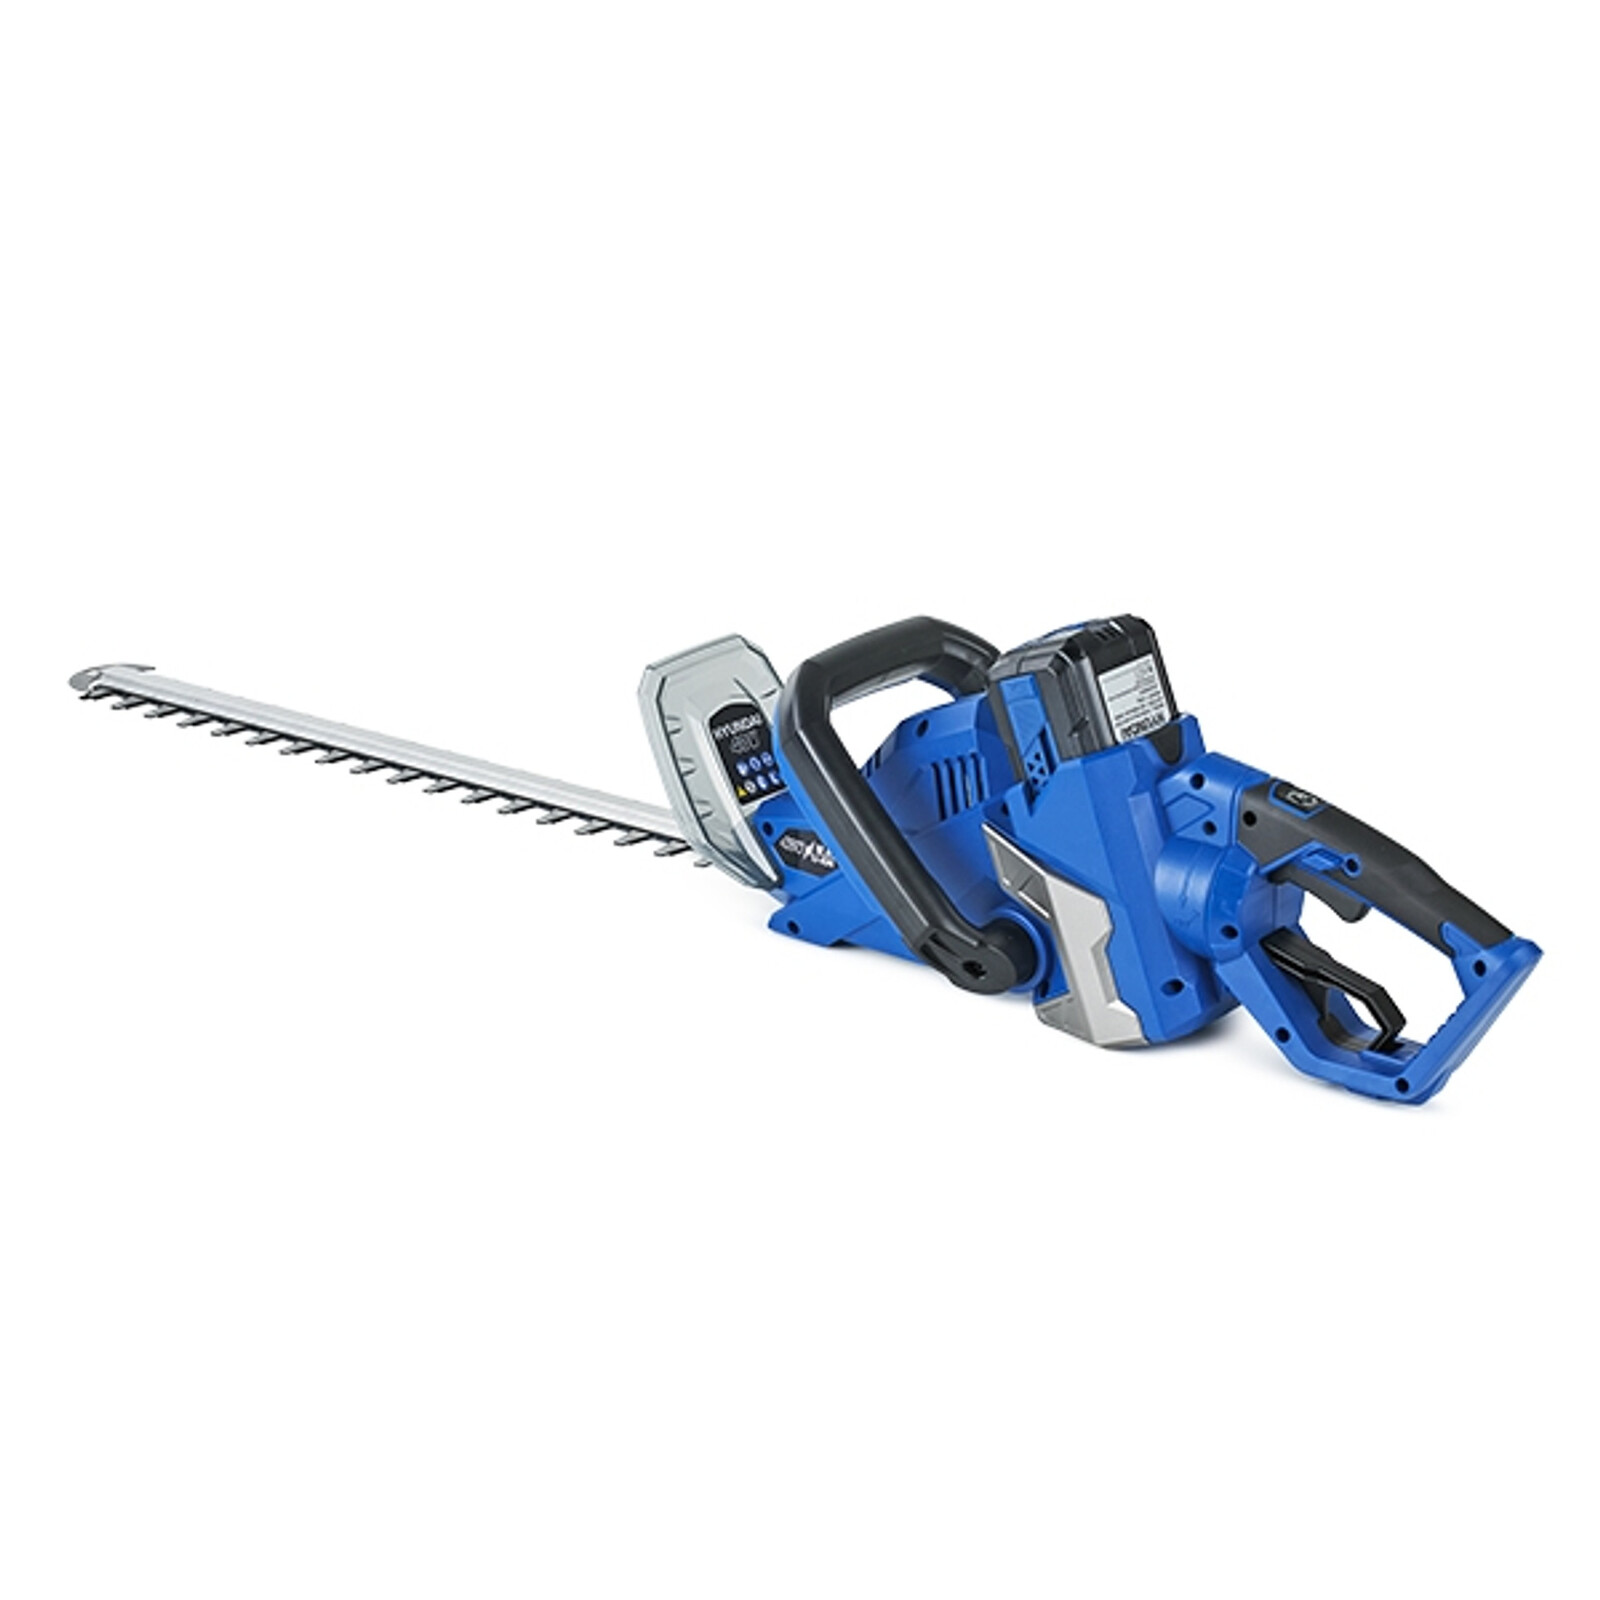 Hyundai 40V Battery Hedge Trimmer with 2Ah Lithium Battery and Charger